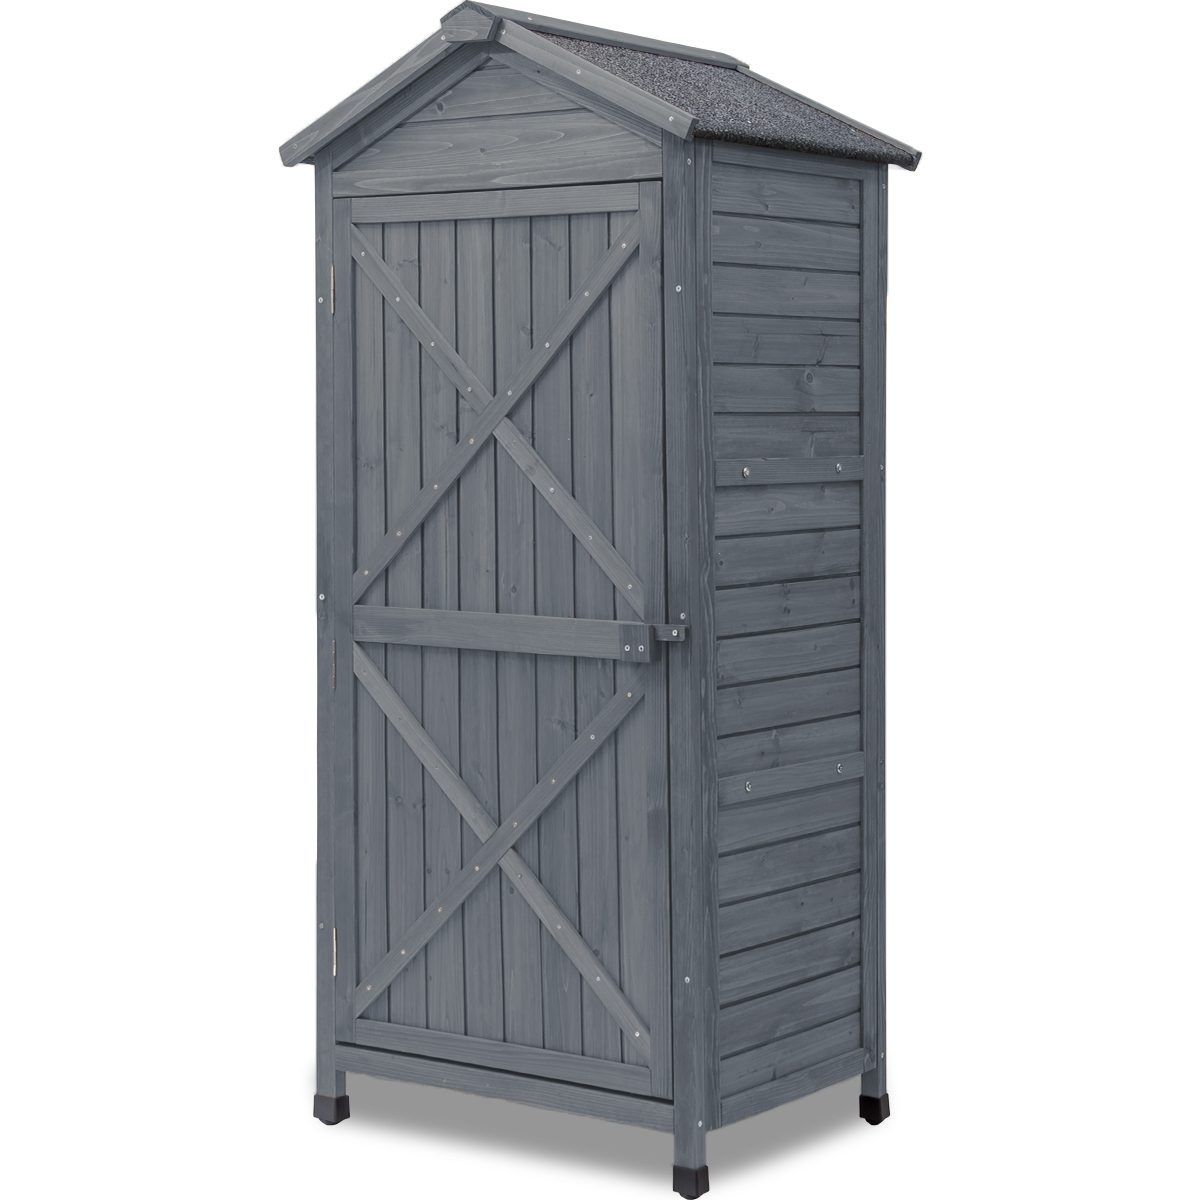 Outdoor Wooden Storage Sheds Fir Wood Lockers with Workstation,Gray     -CASAINC